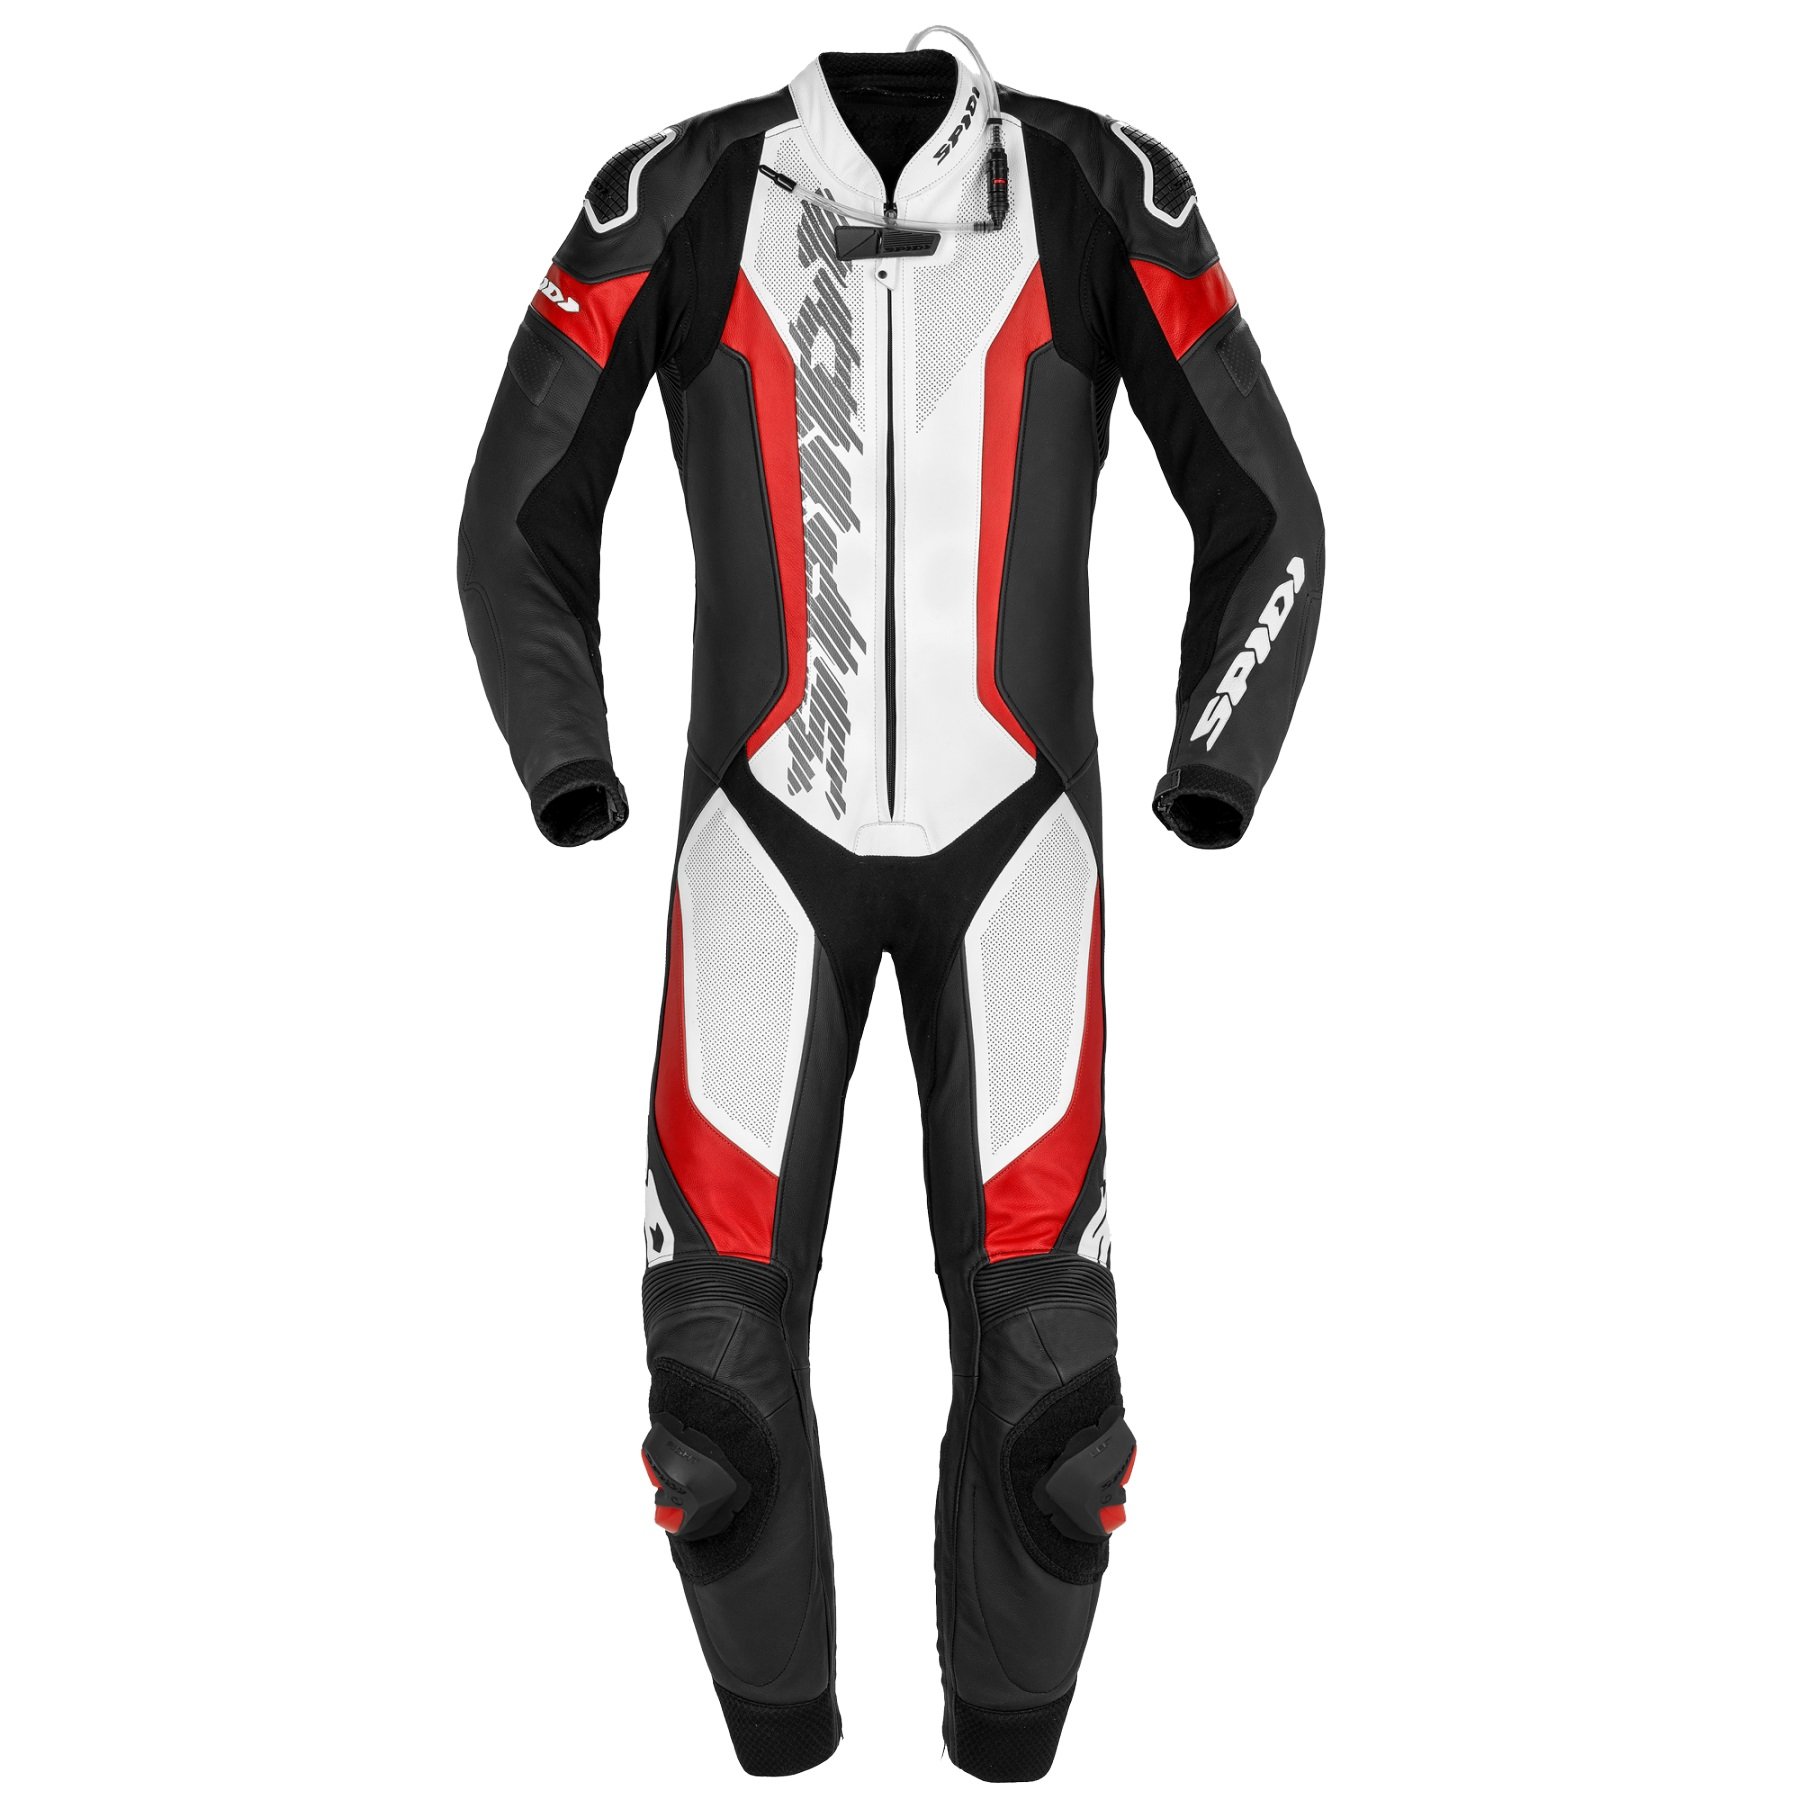 Image of Spidi Laser Pro Perforated Red 1 Piece Motorcycle Racing Suit Talla 56